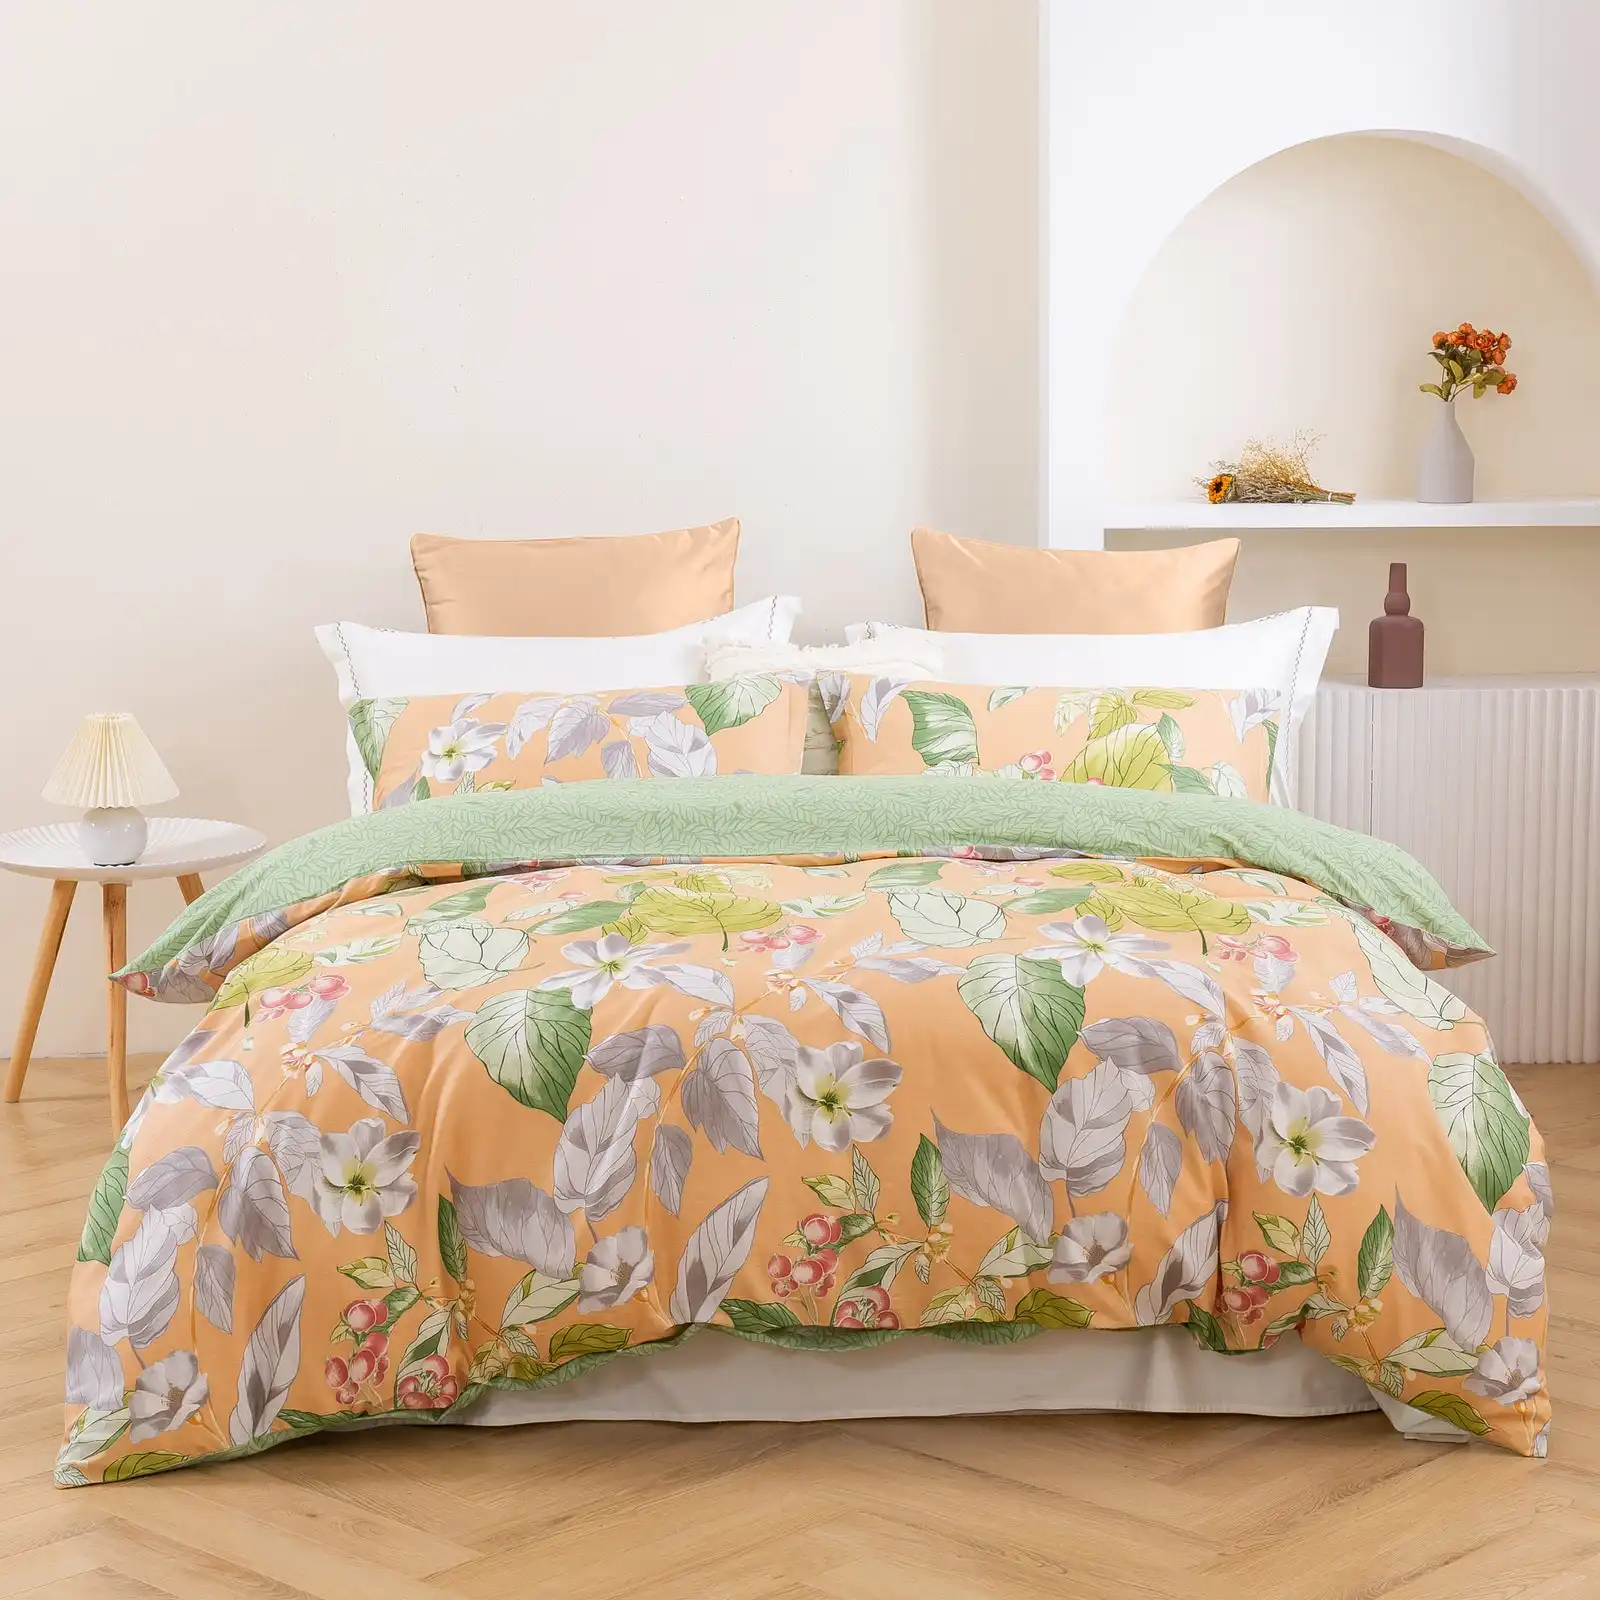 Dreamaker Peach Lily 100% Cotton Reversible Quilt Cover Set King Bed